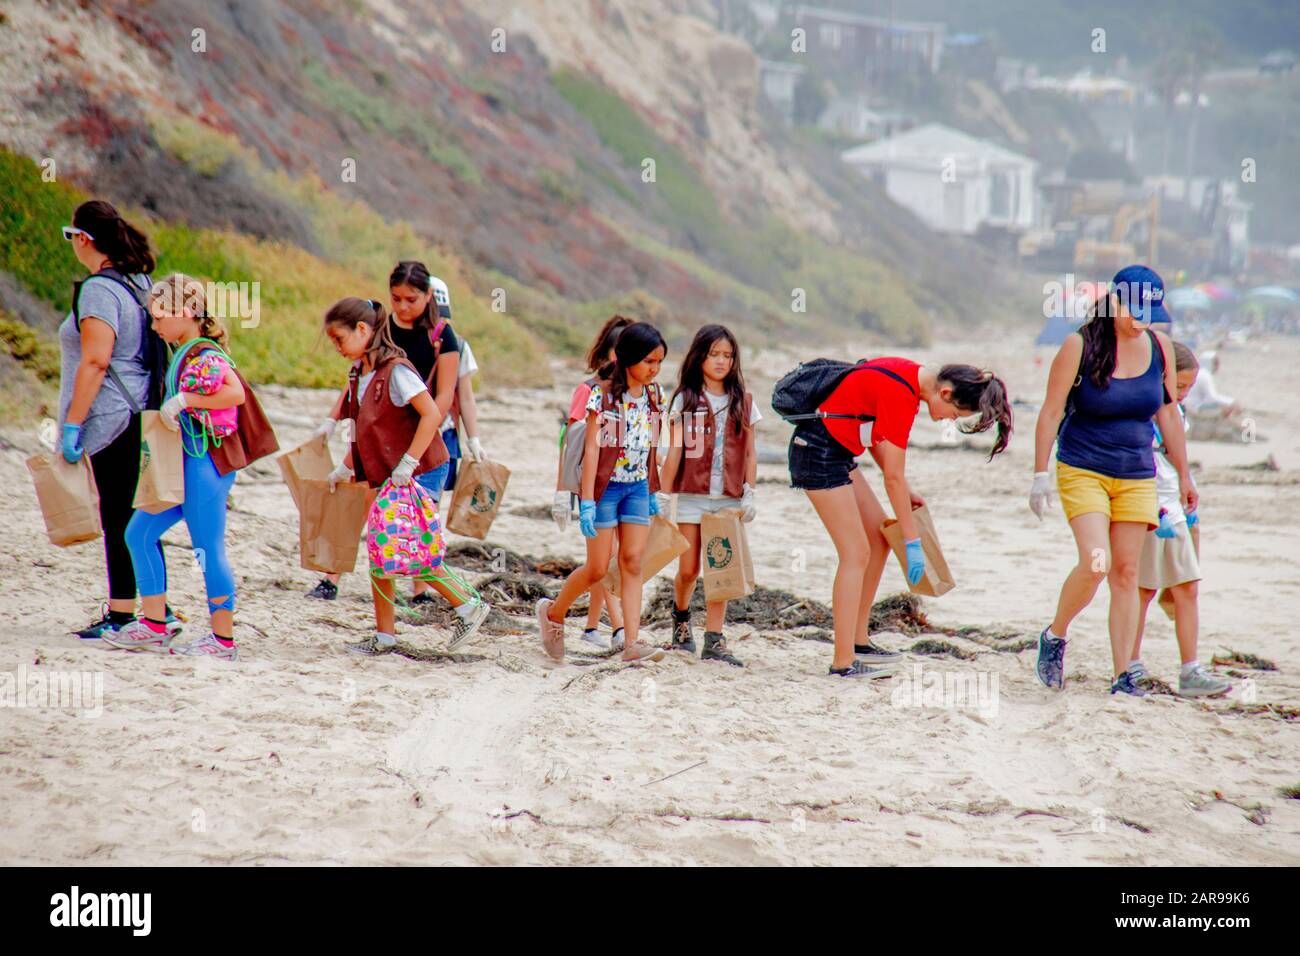 In their Brownie Girl Scout vests and rubber gloves and carrying trash bags, daughters join their mothers in search of refuse to collect on the shore in Laguna Beach, CA. Stock Photo